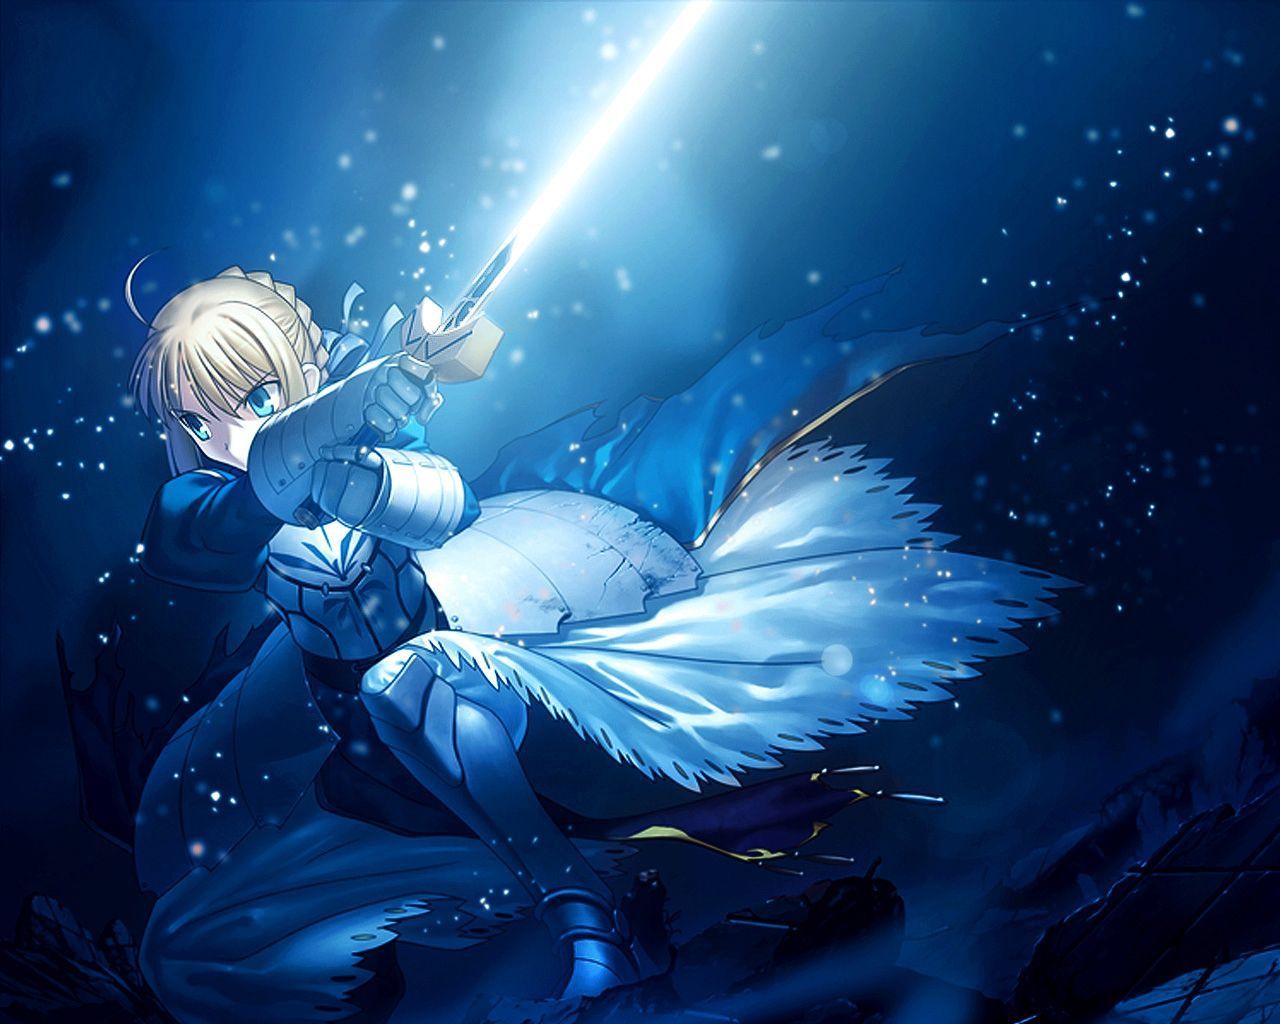 Fate / Stay Night Computer Wallpapers, Desktop Backgrounds